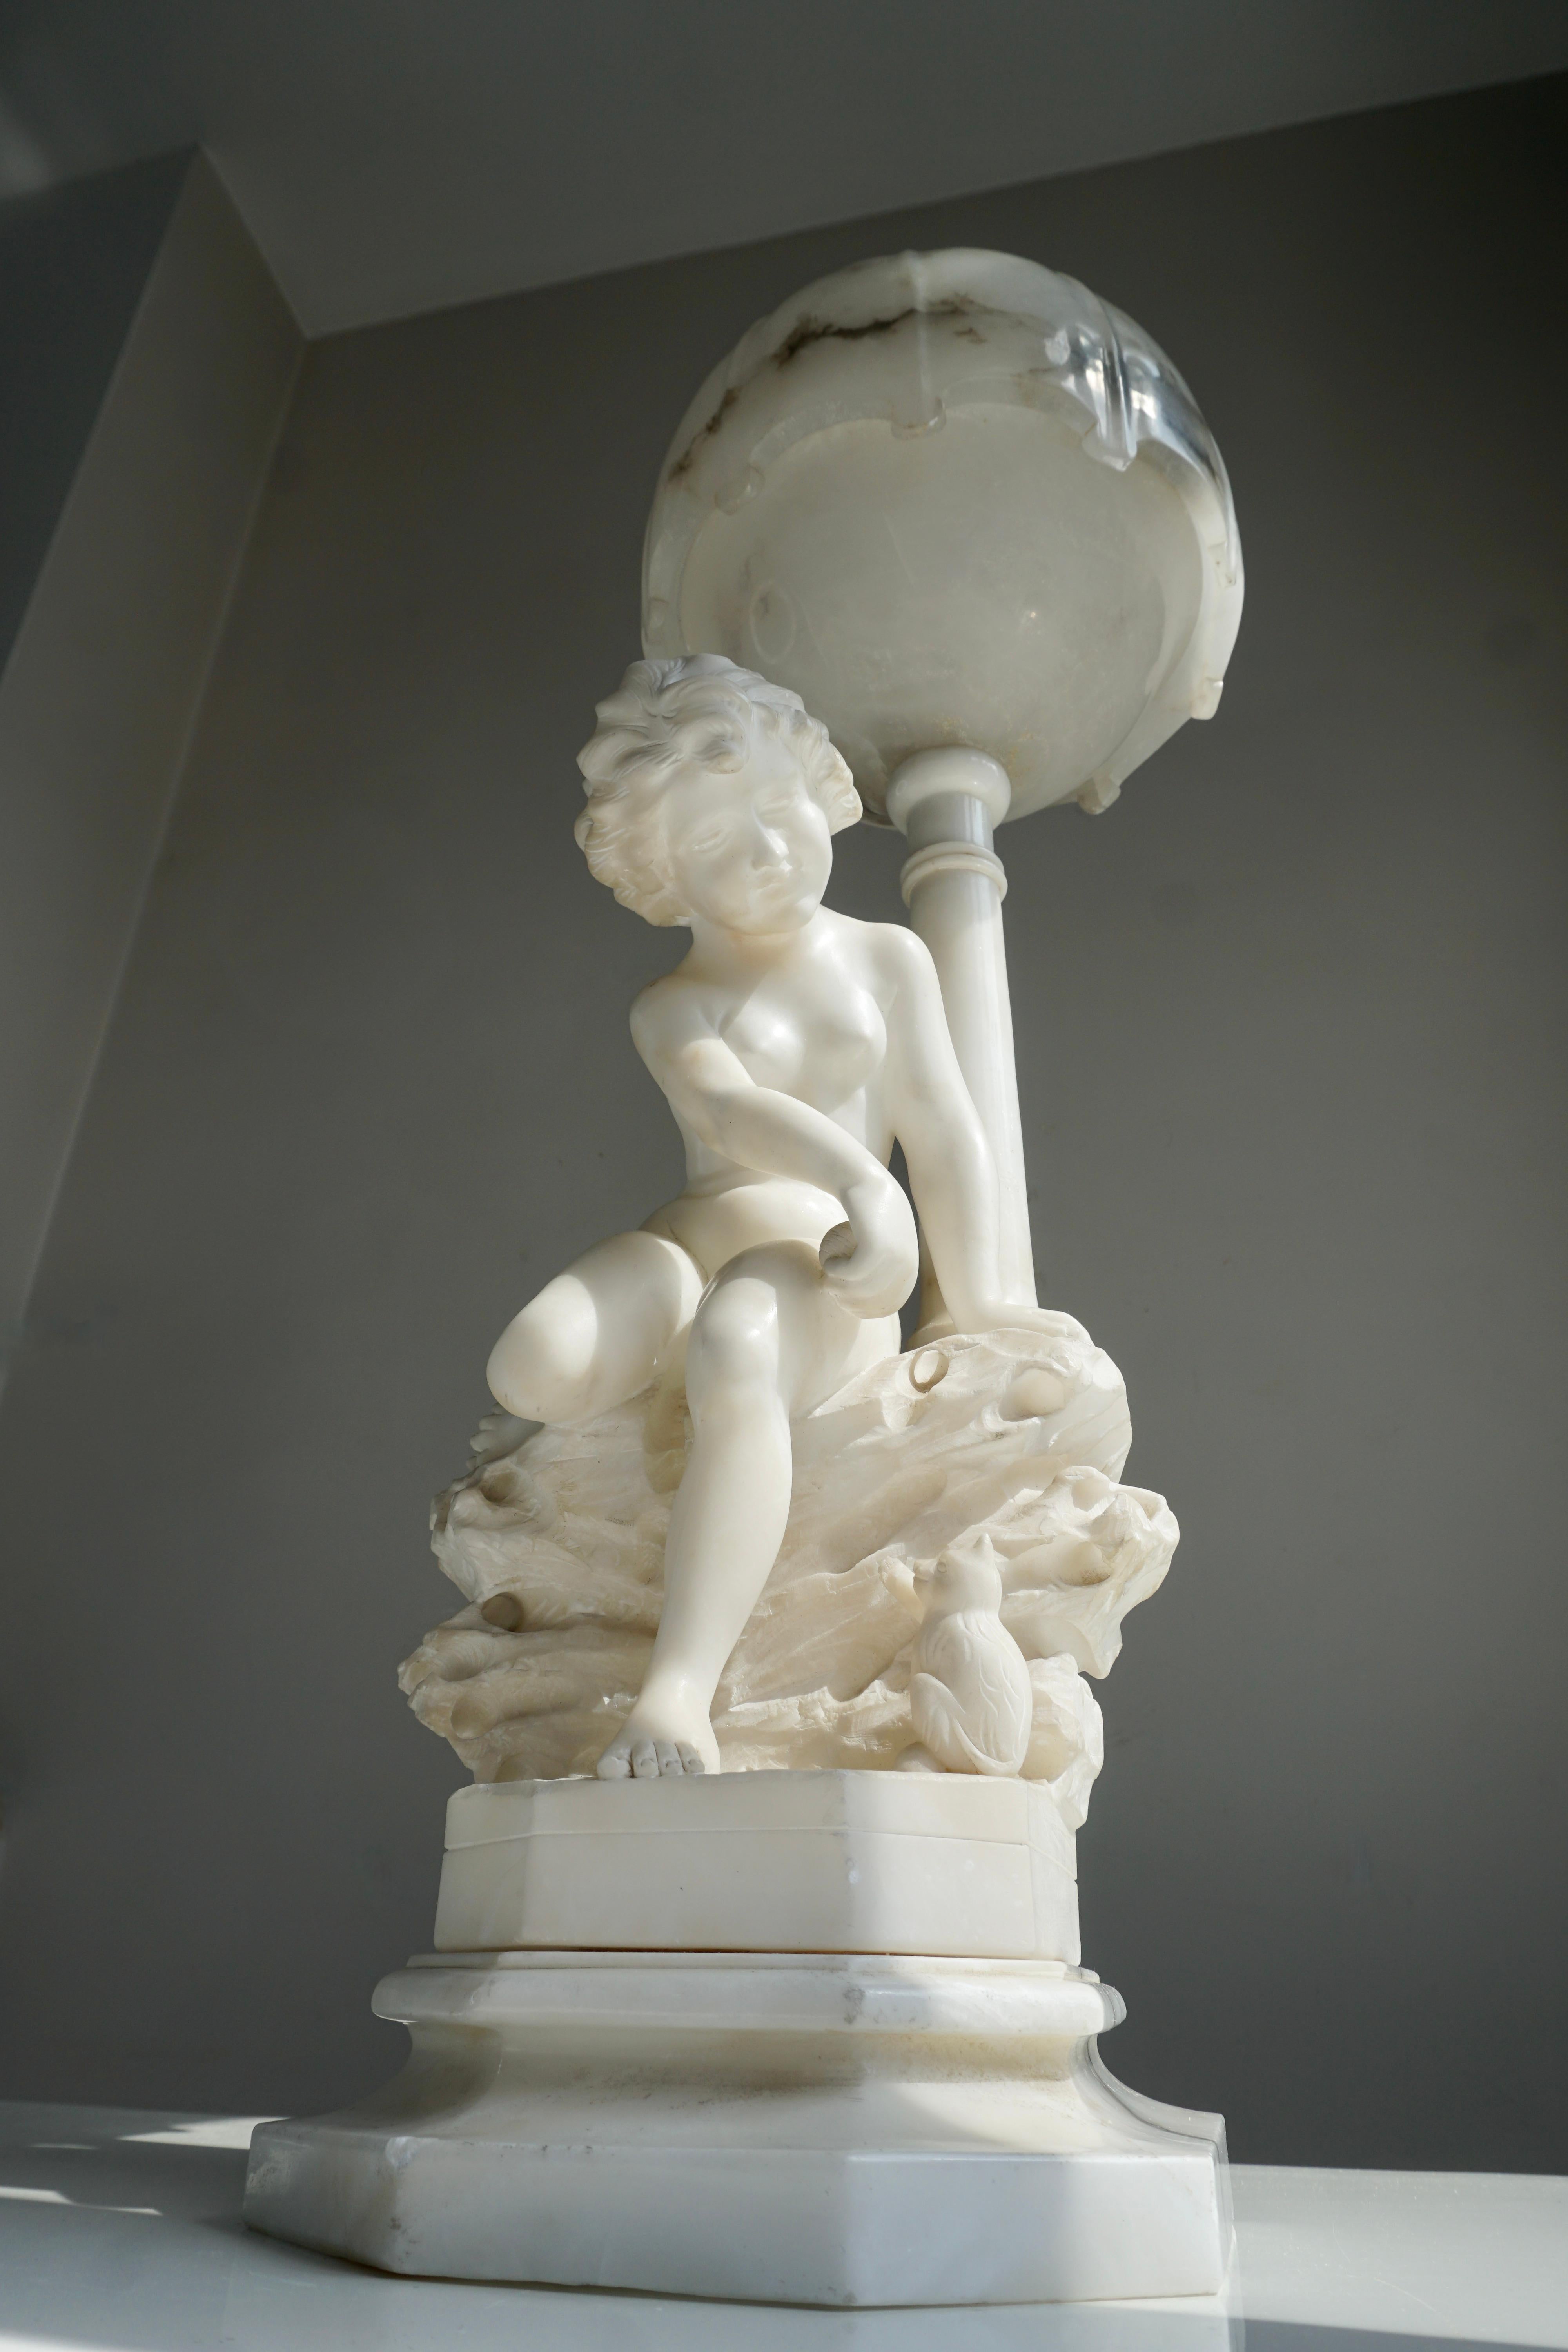 Fine rare antique Italian alabaster lamp depicting a beautiful young girl sitting on a rock , playing with a kitty cat. The shade is a 2-piece globe, also made of alabaster.

This Circa 1920 hand-carved alabaster lamp serves as both an art form as